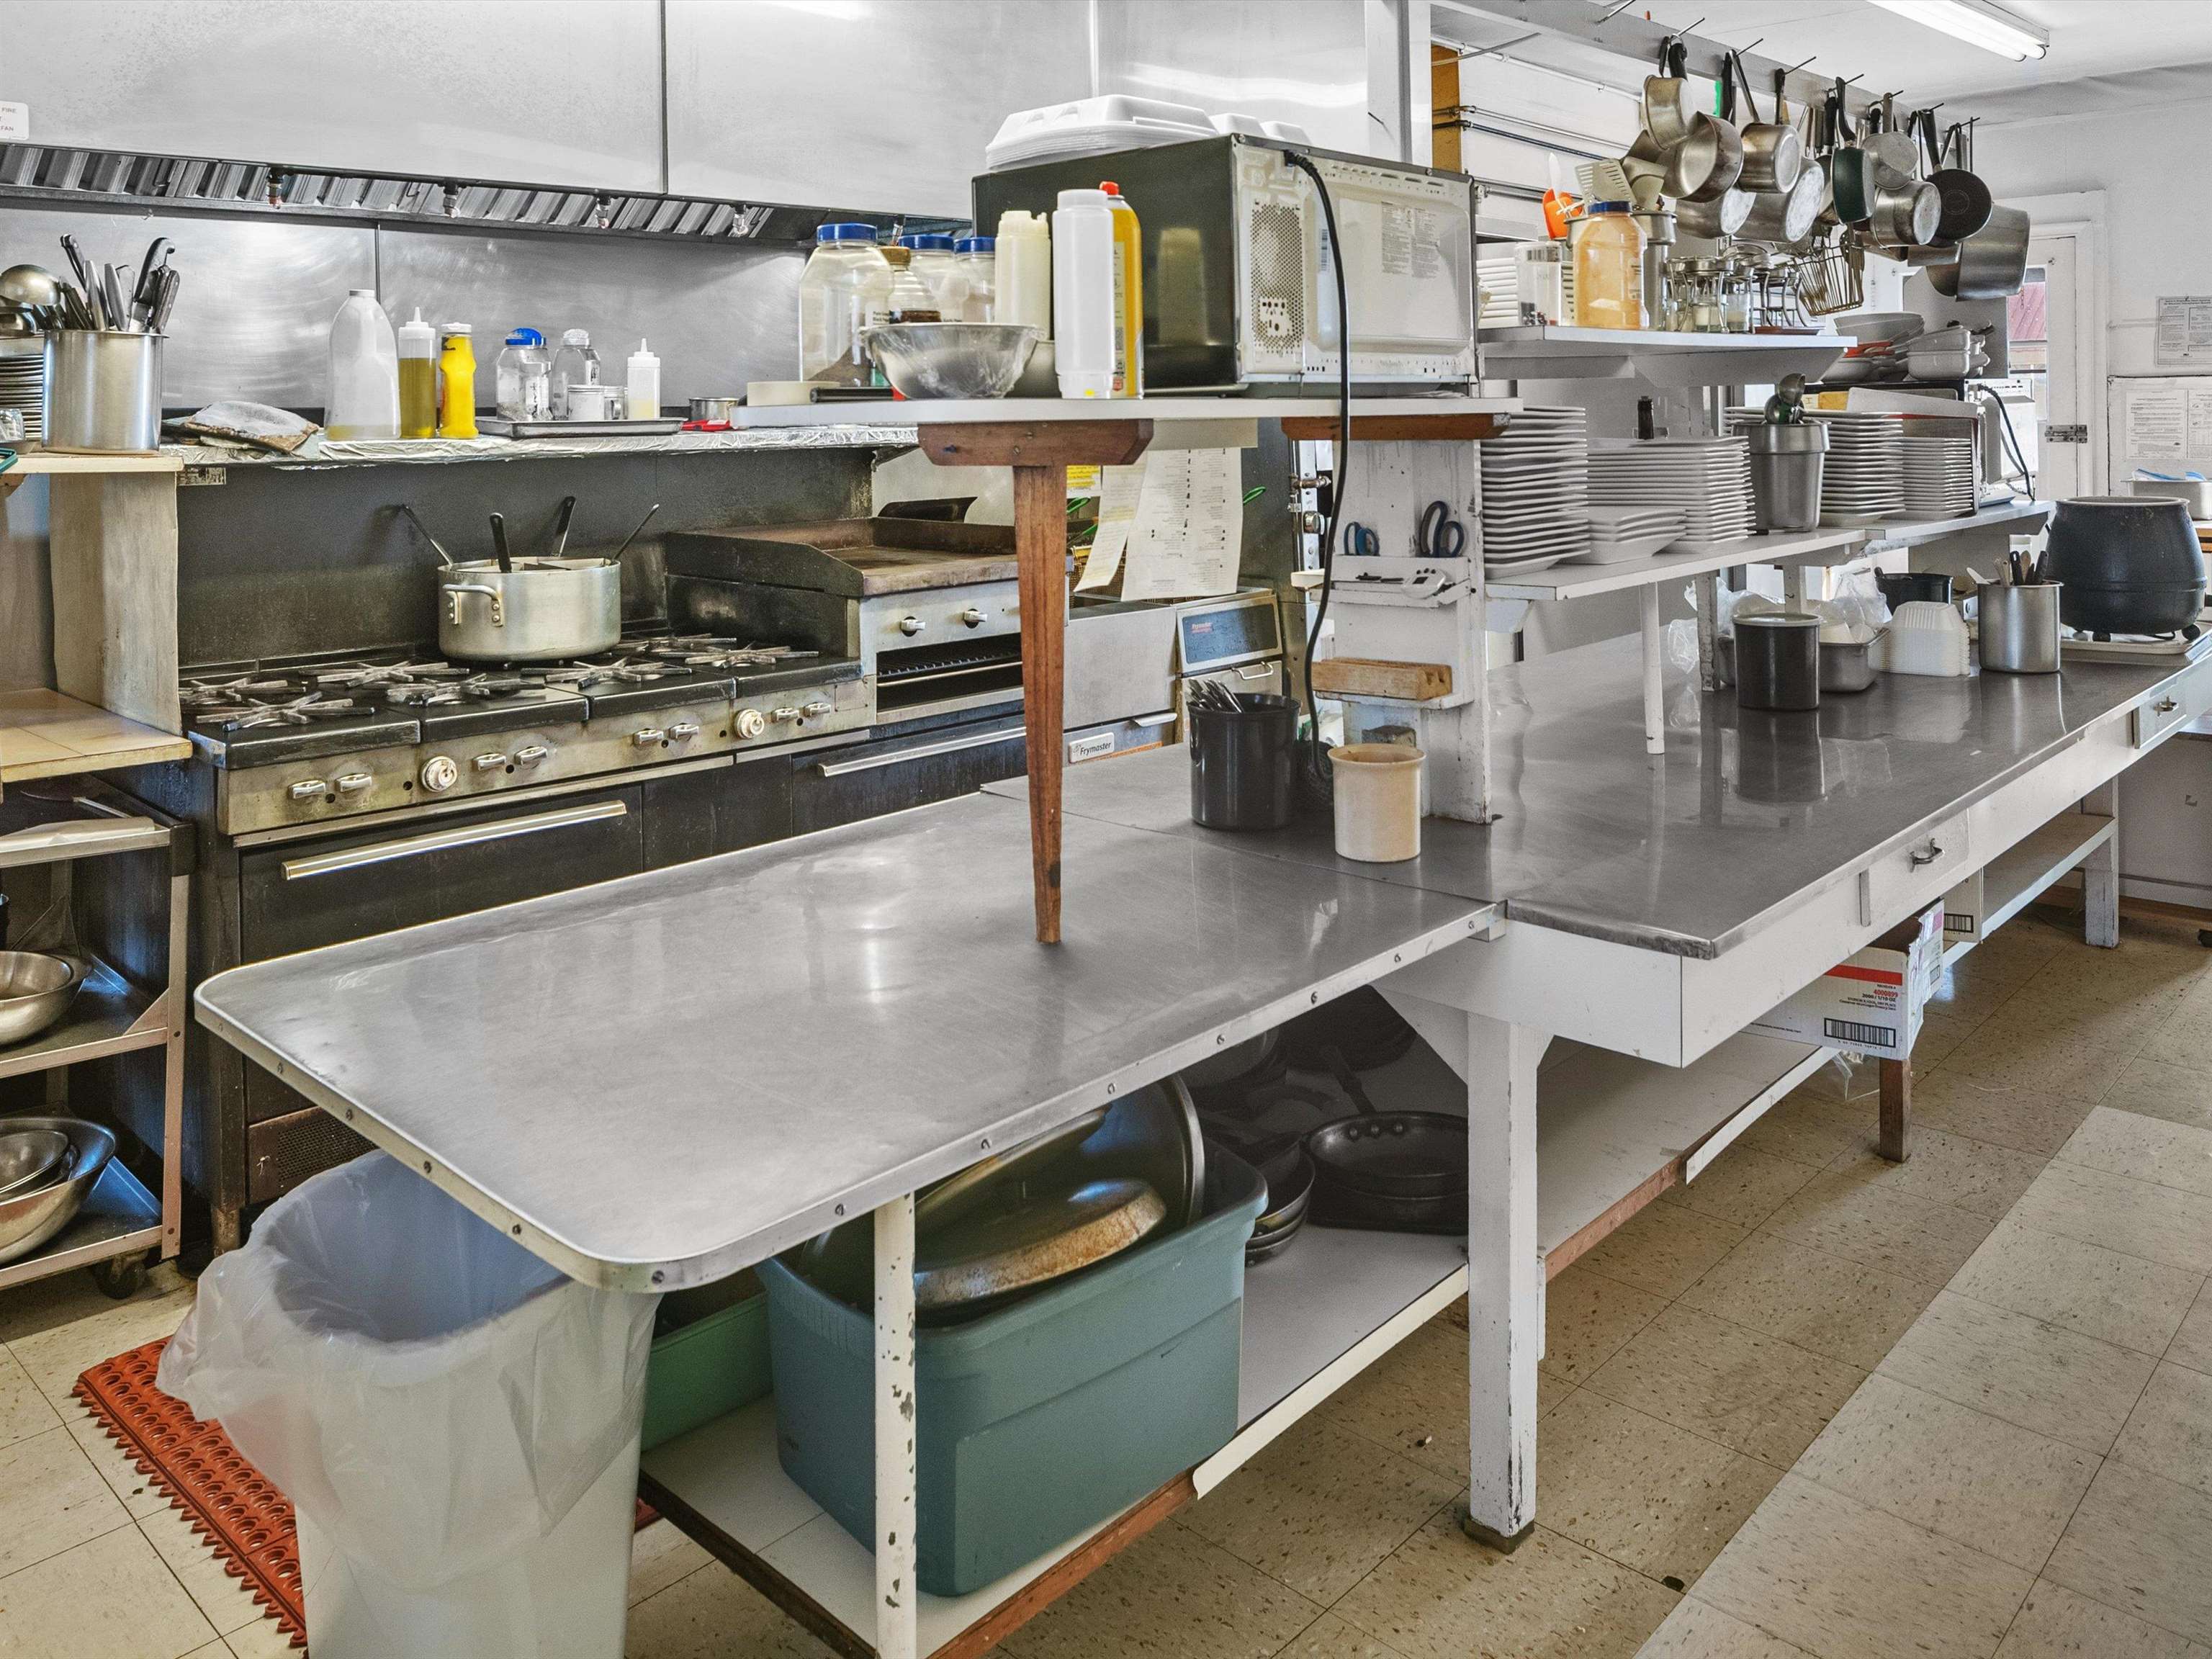 Very large commercial kitchen